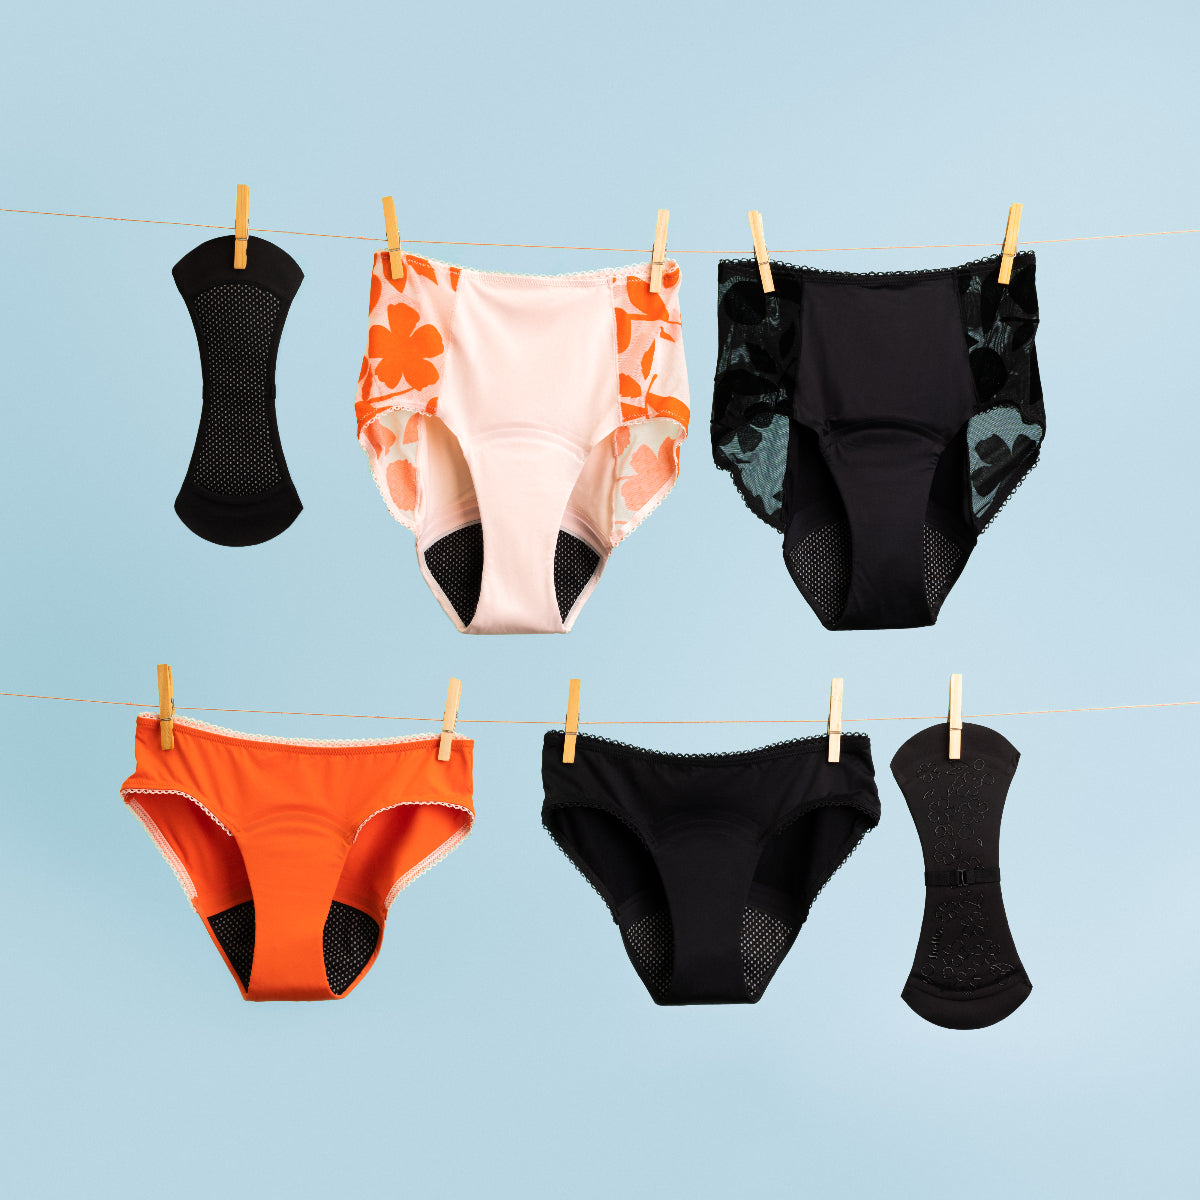 Period underwear for endometriosis: alternative to tampons, pads